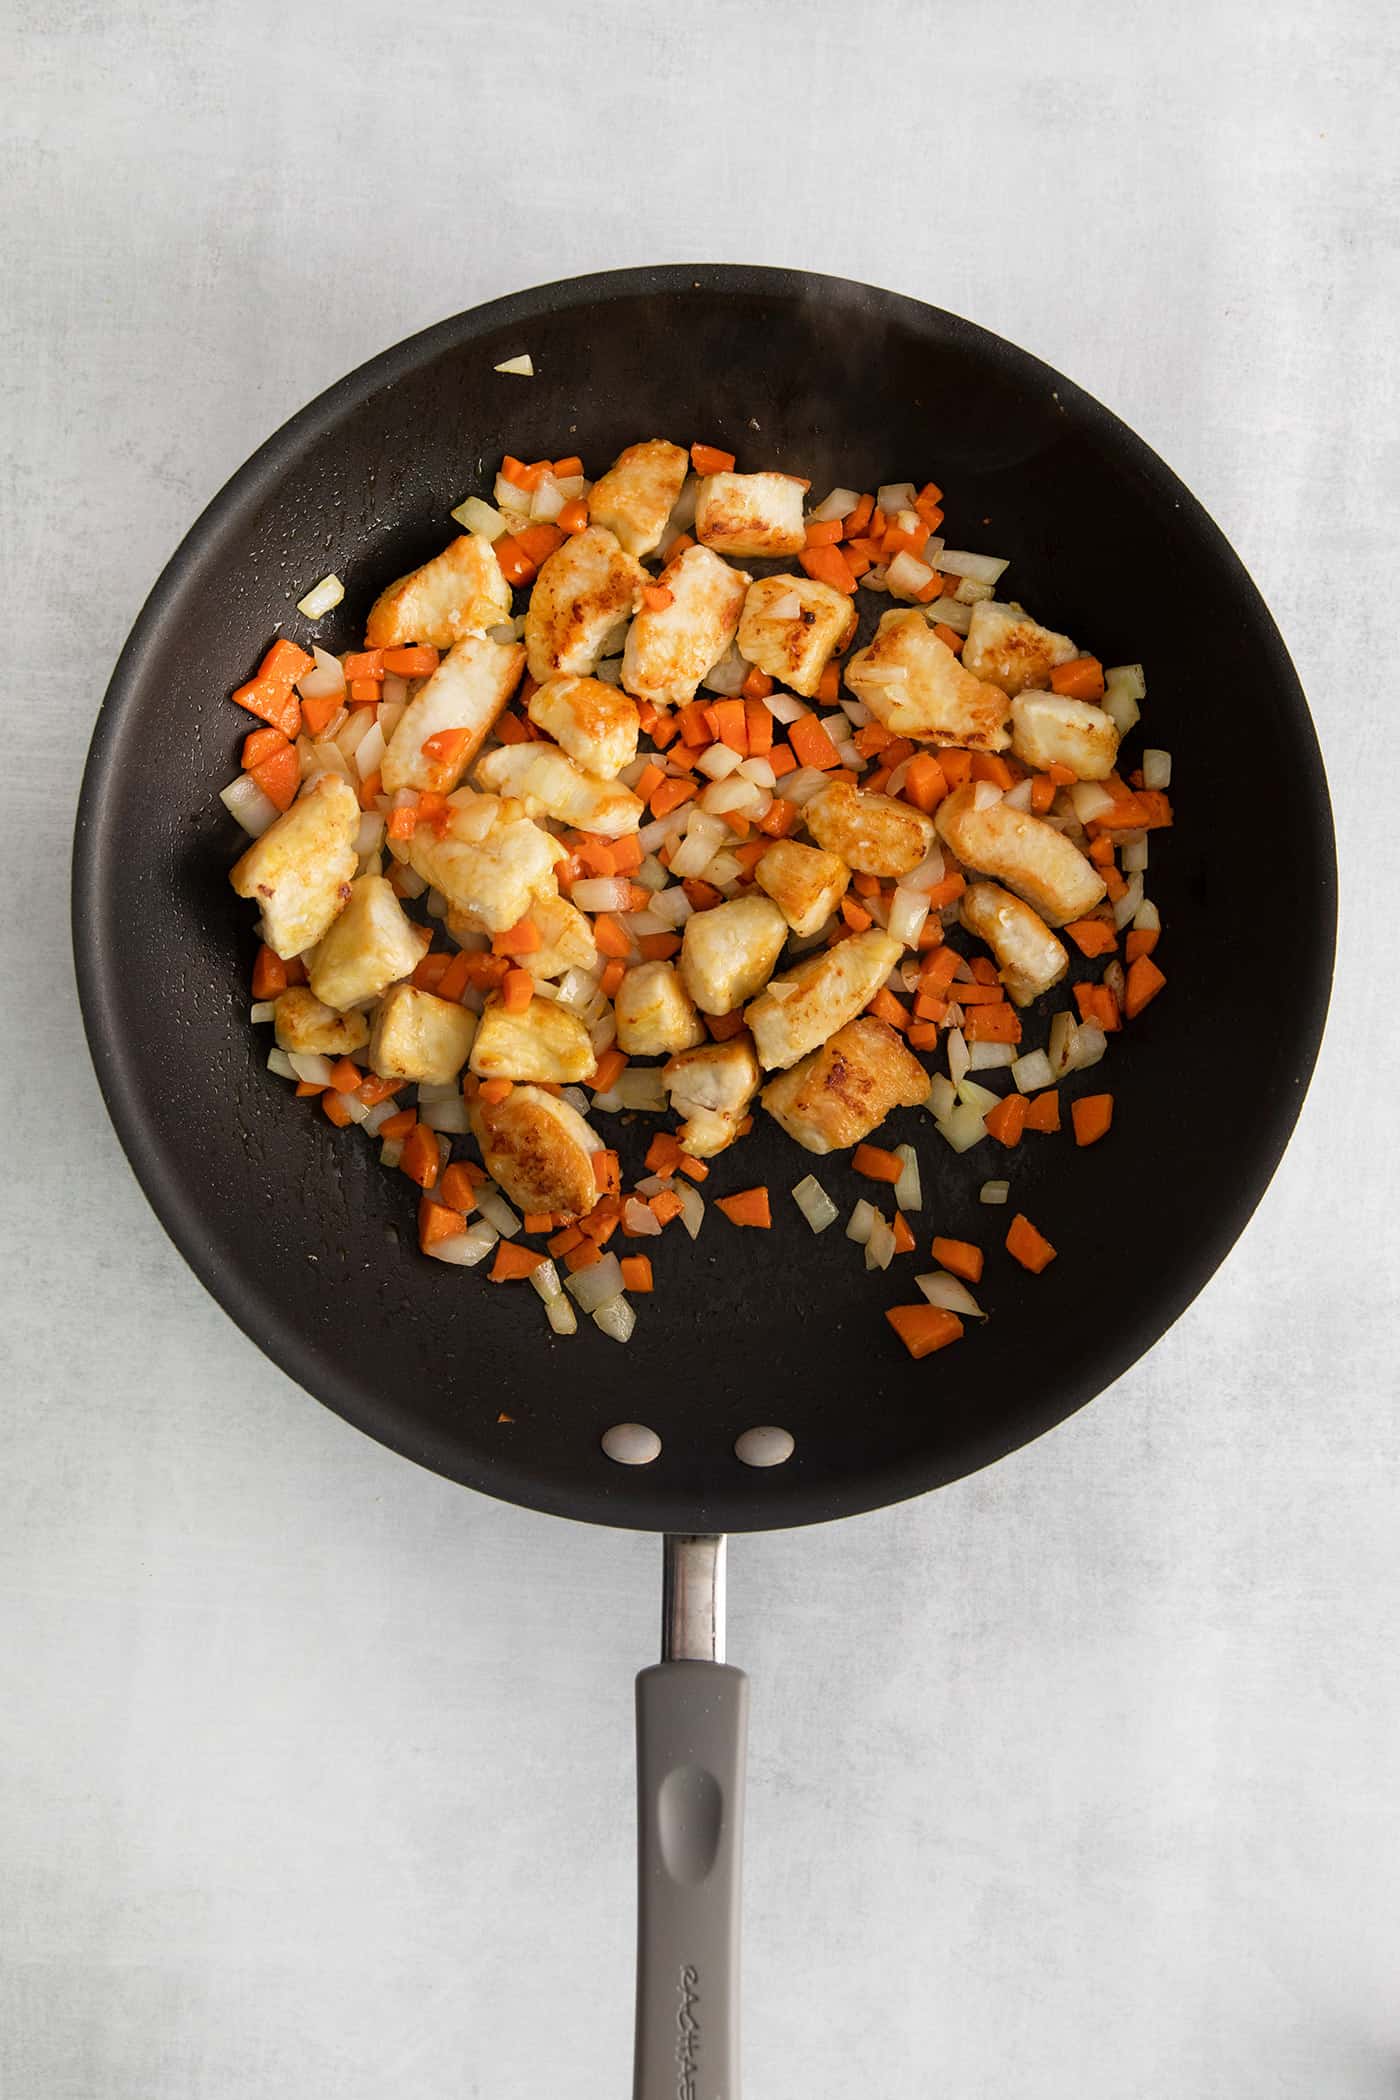 Overhead view of chicken pieces, carrot, and onion in a skillet